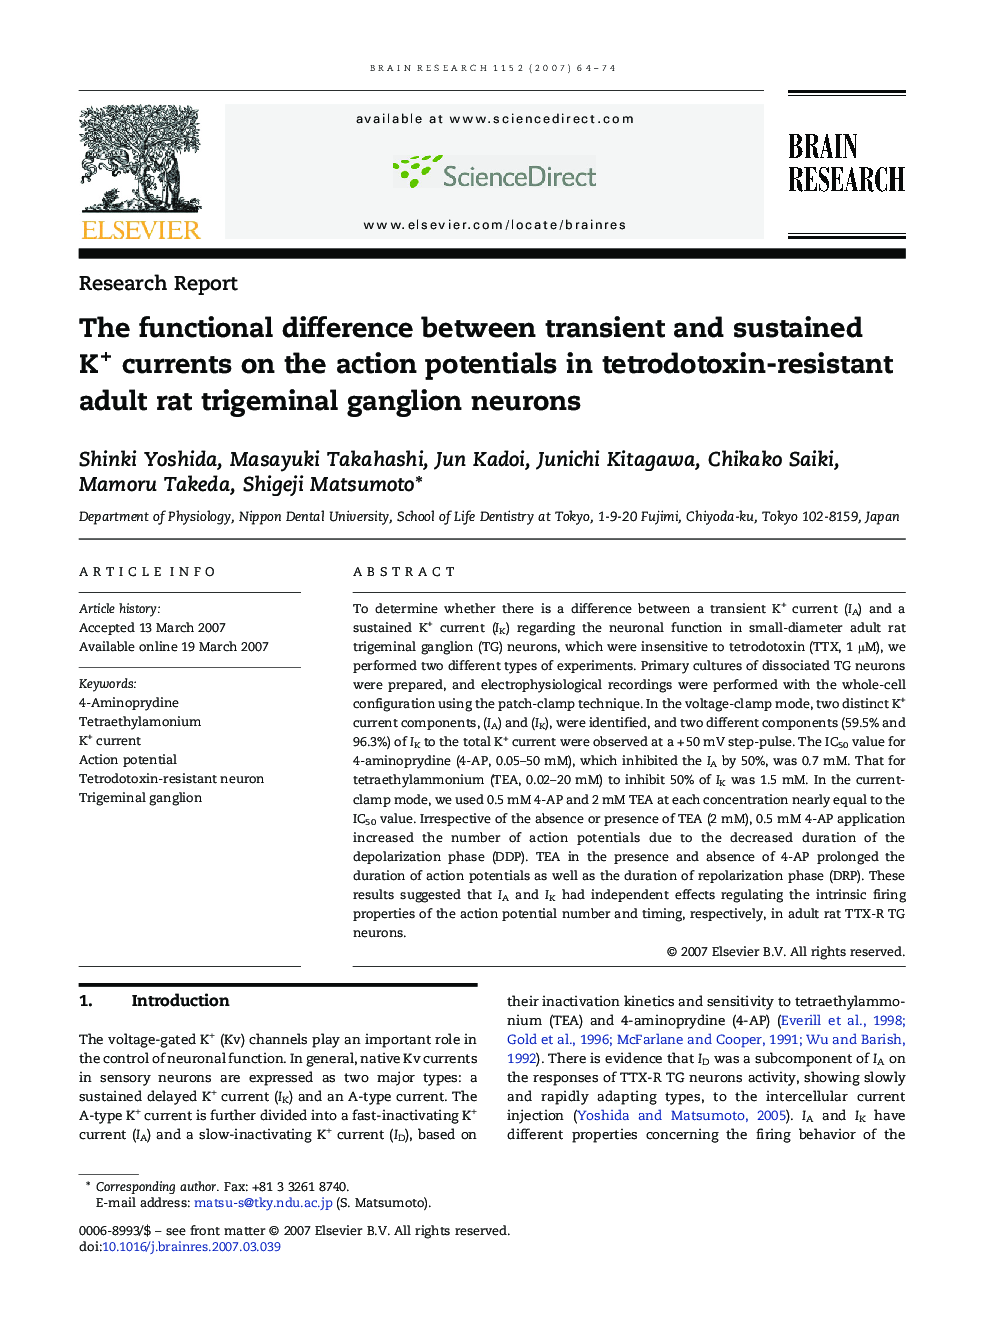 The functional difference between transient and sustained K+ currents on the action potentials in tetrodotoxin-resistant adult rat trigeminal ganglion neurons